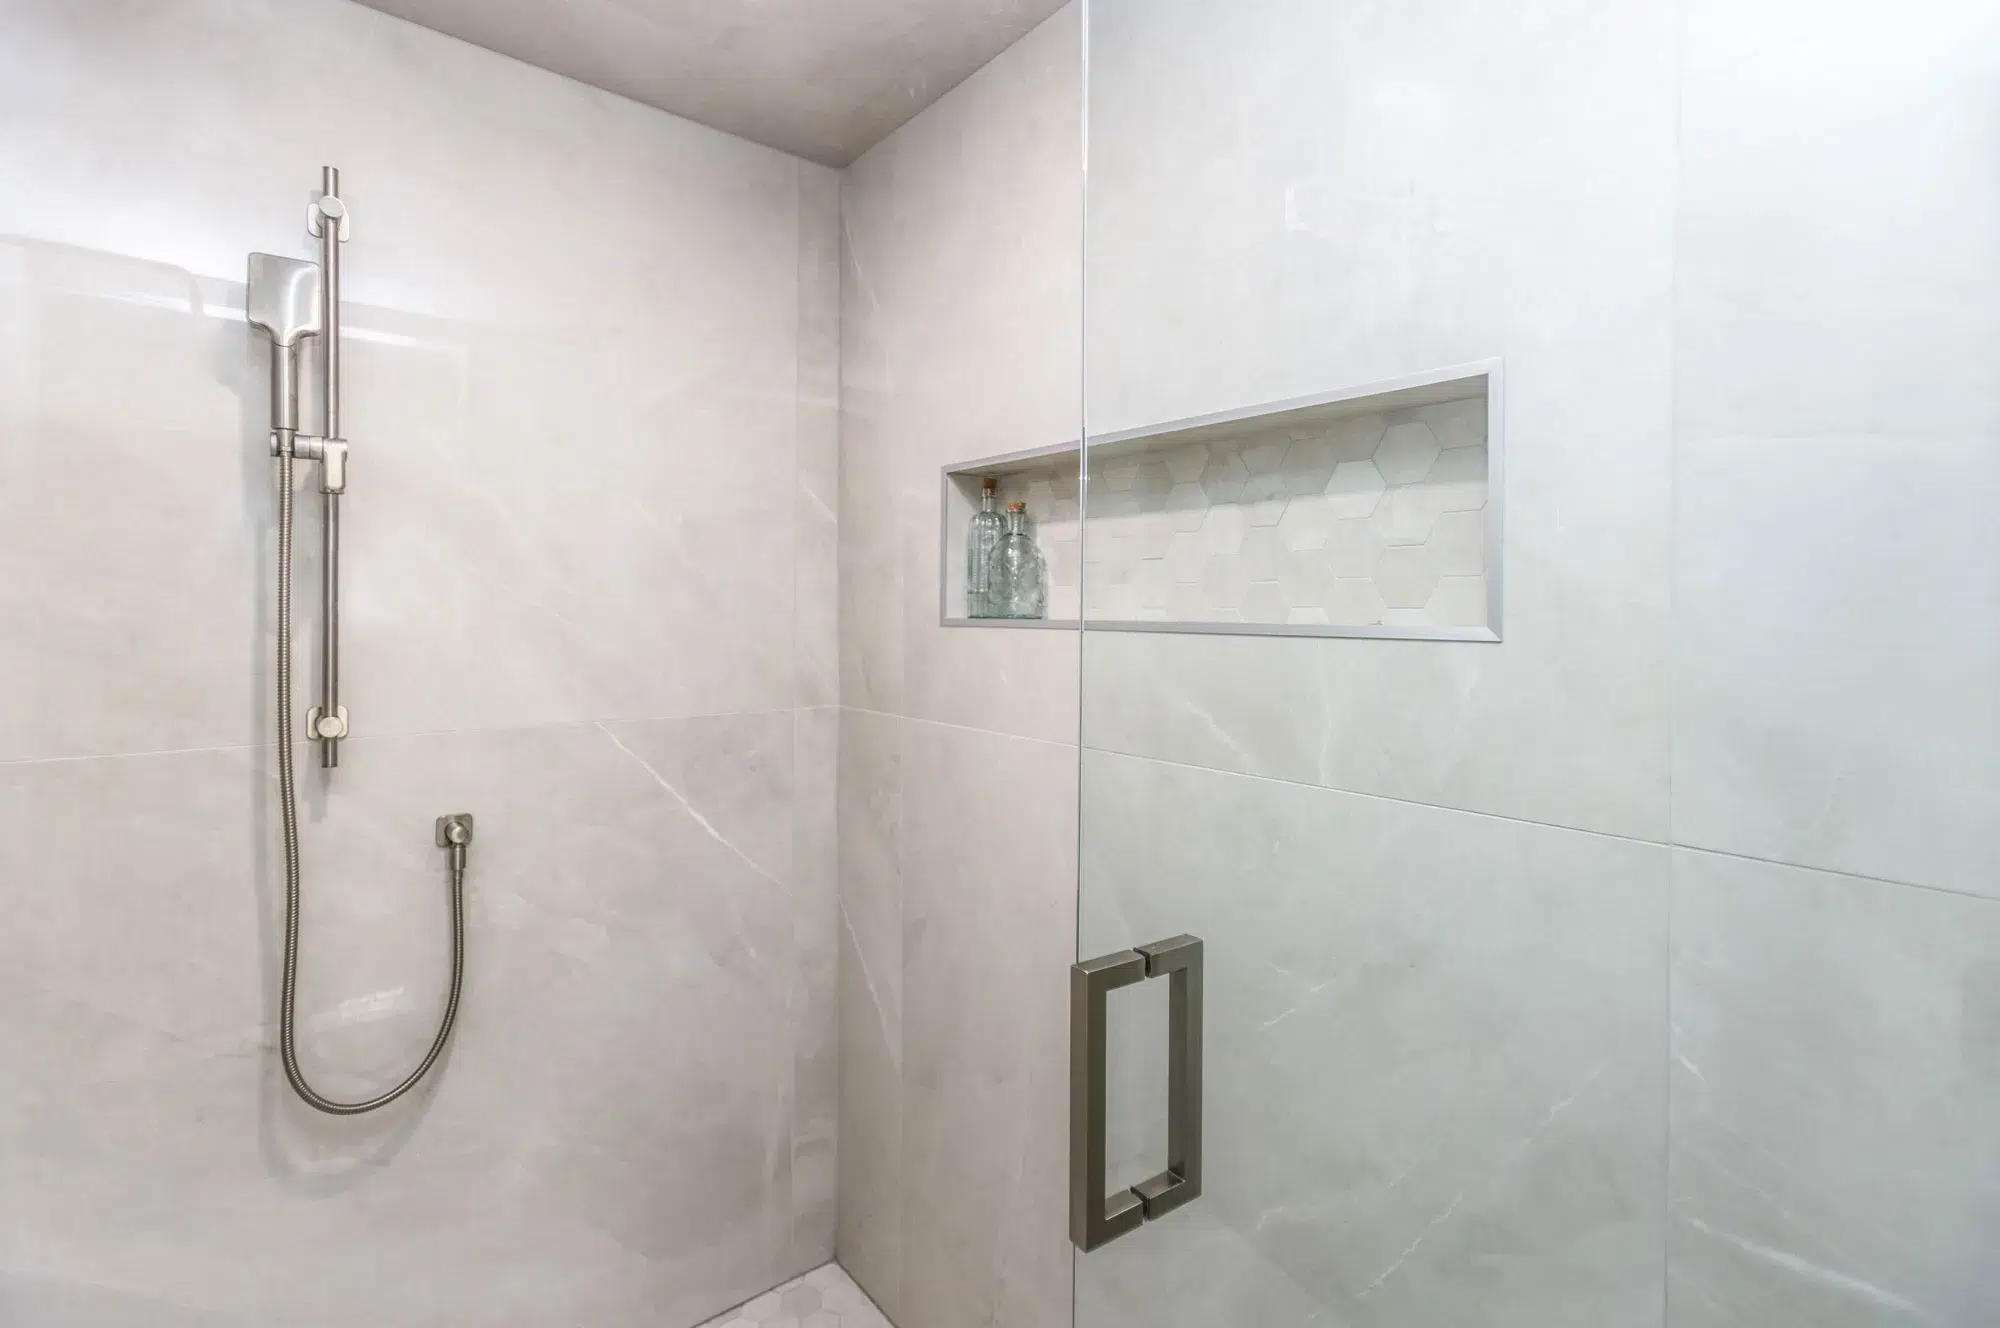 Inside a beautiful tiled shower with glass door with nickel hand held shower